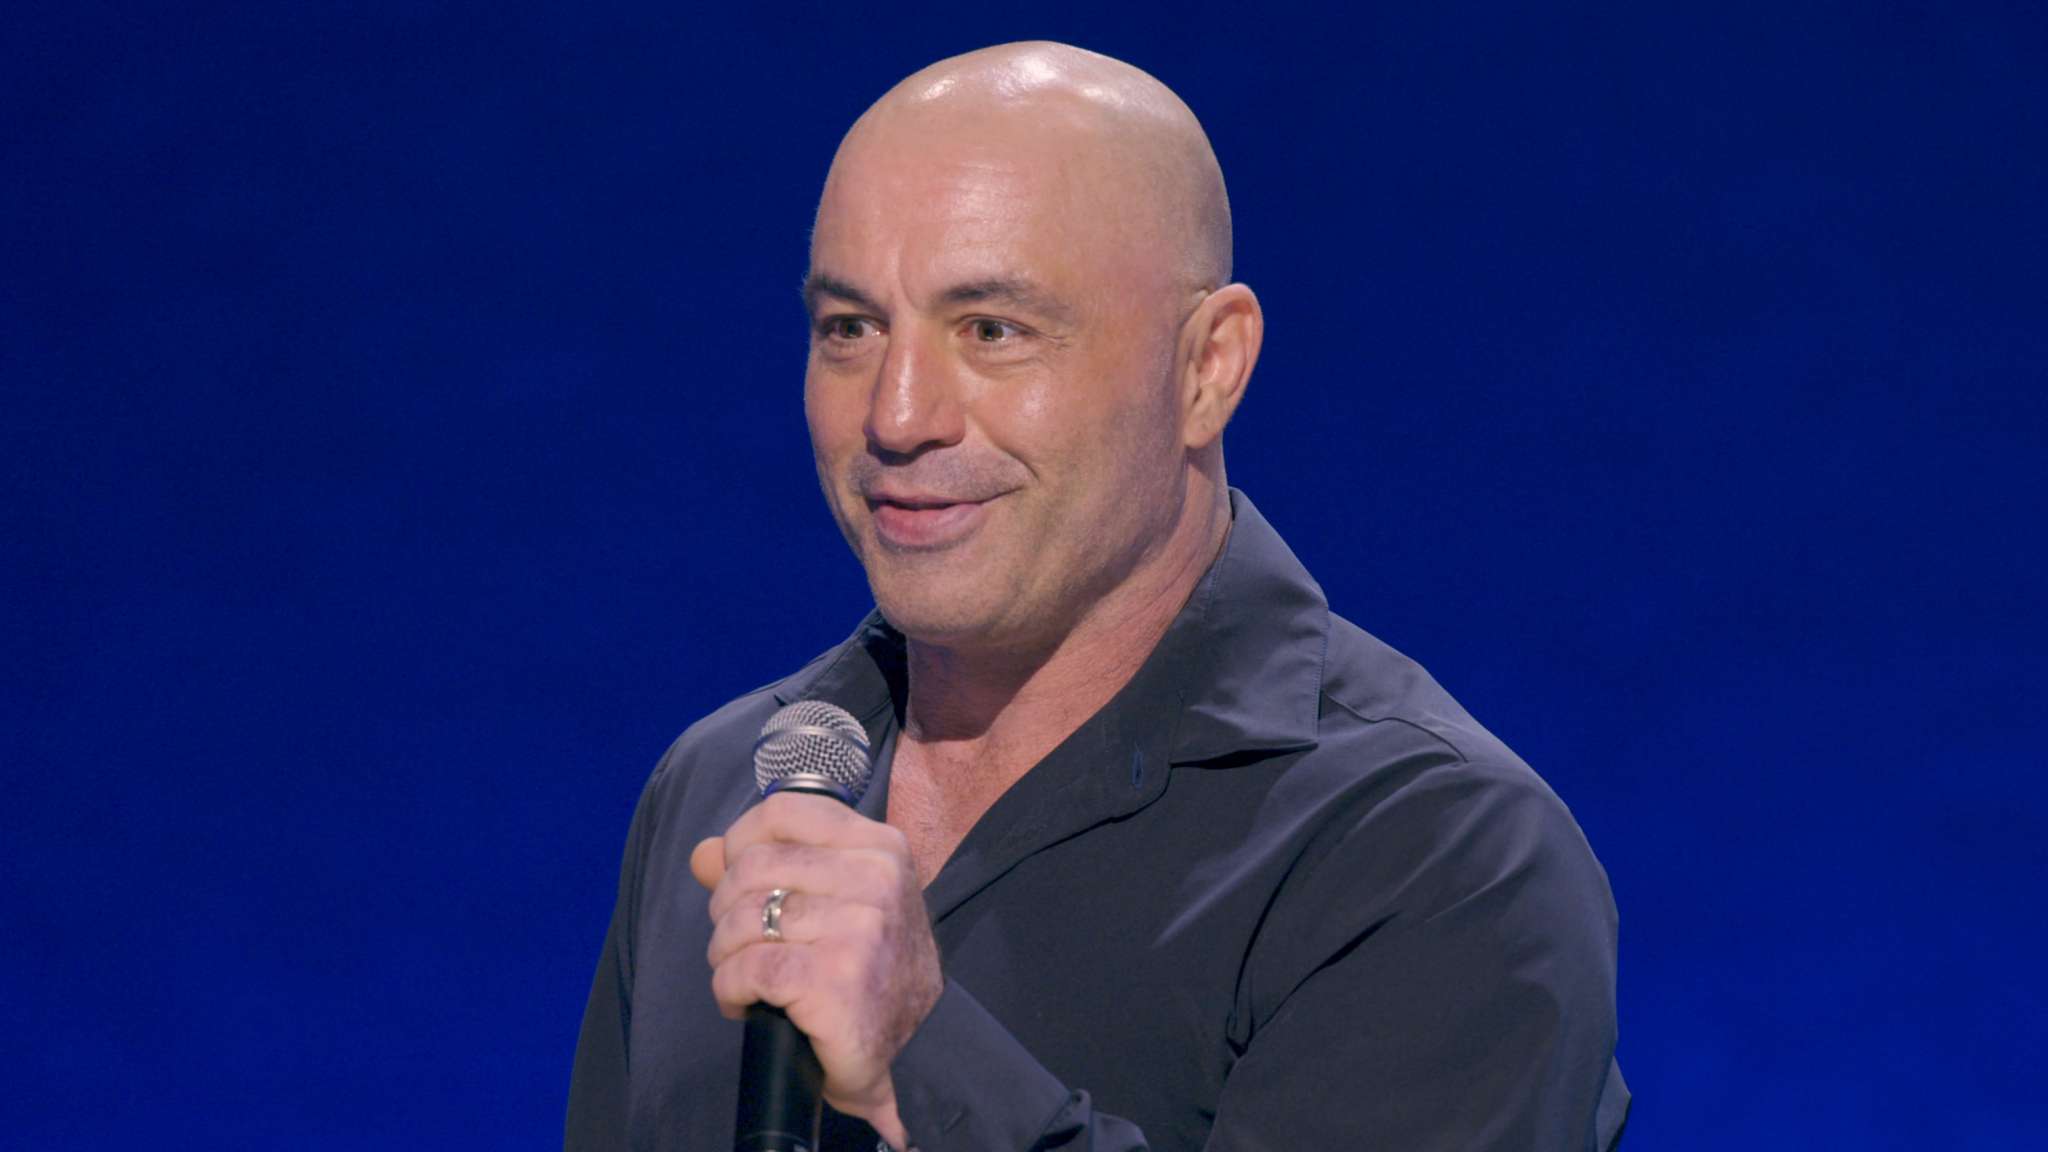 joe-rogan-in-hot-water-after-arguing-young-healthy-people-and-kids-should-not-get-the-covid-19-vaccine